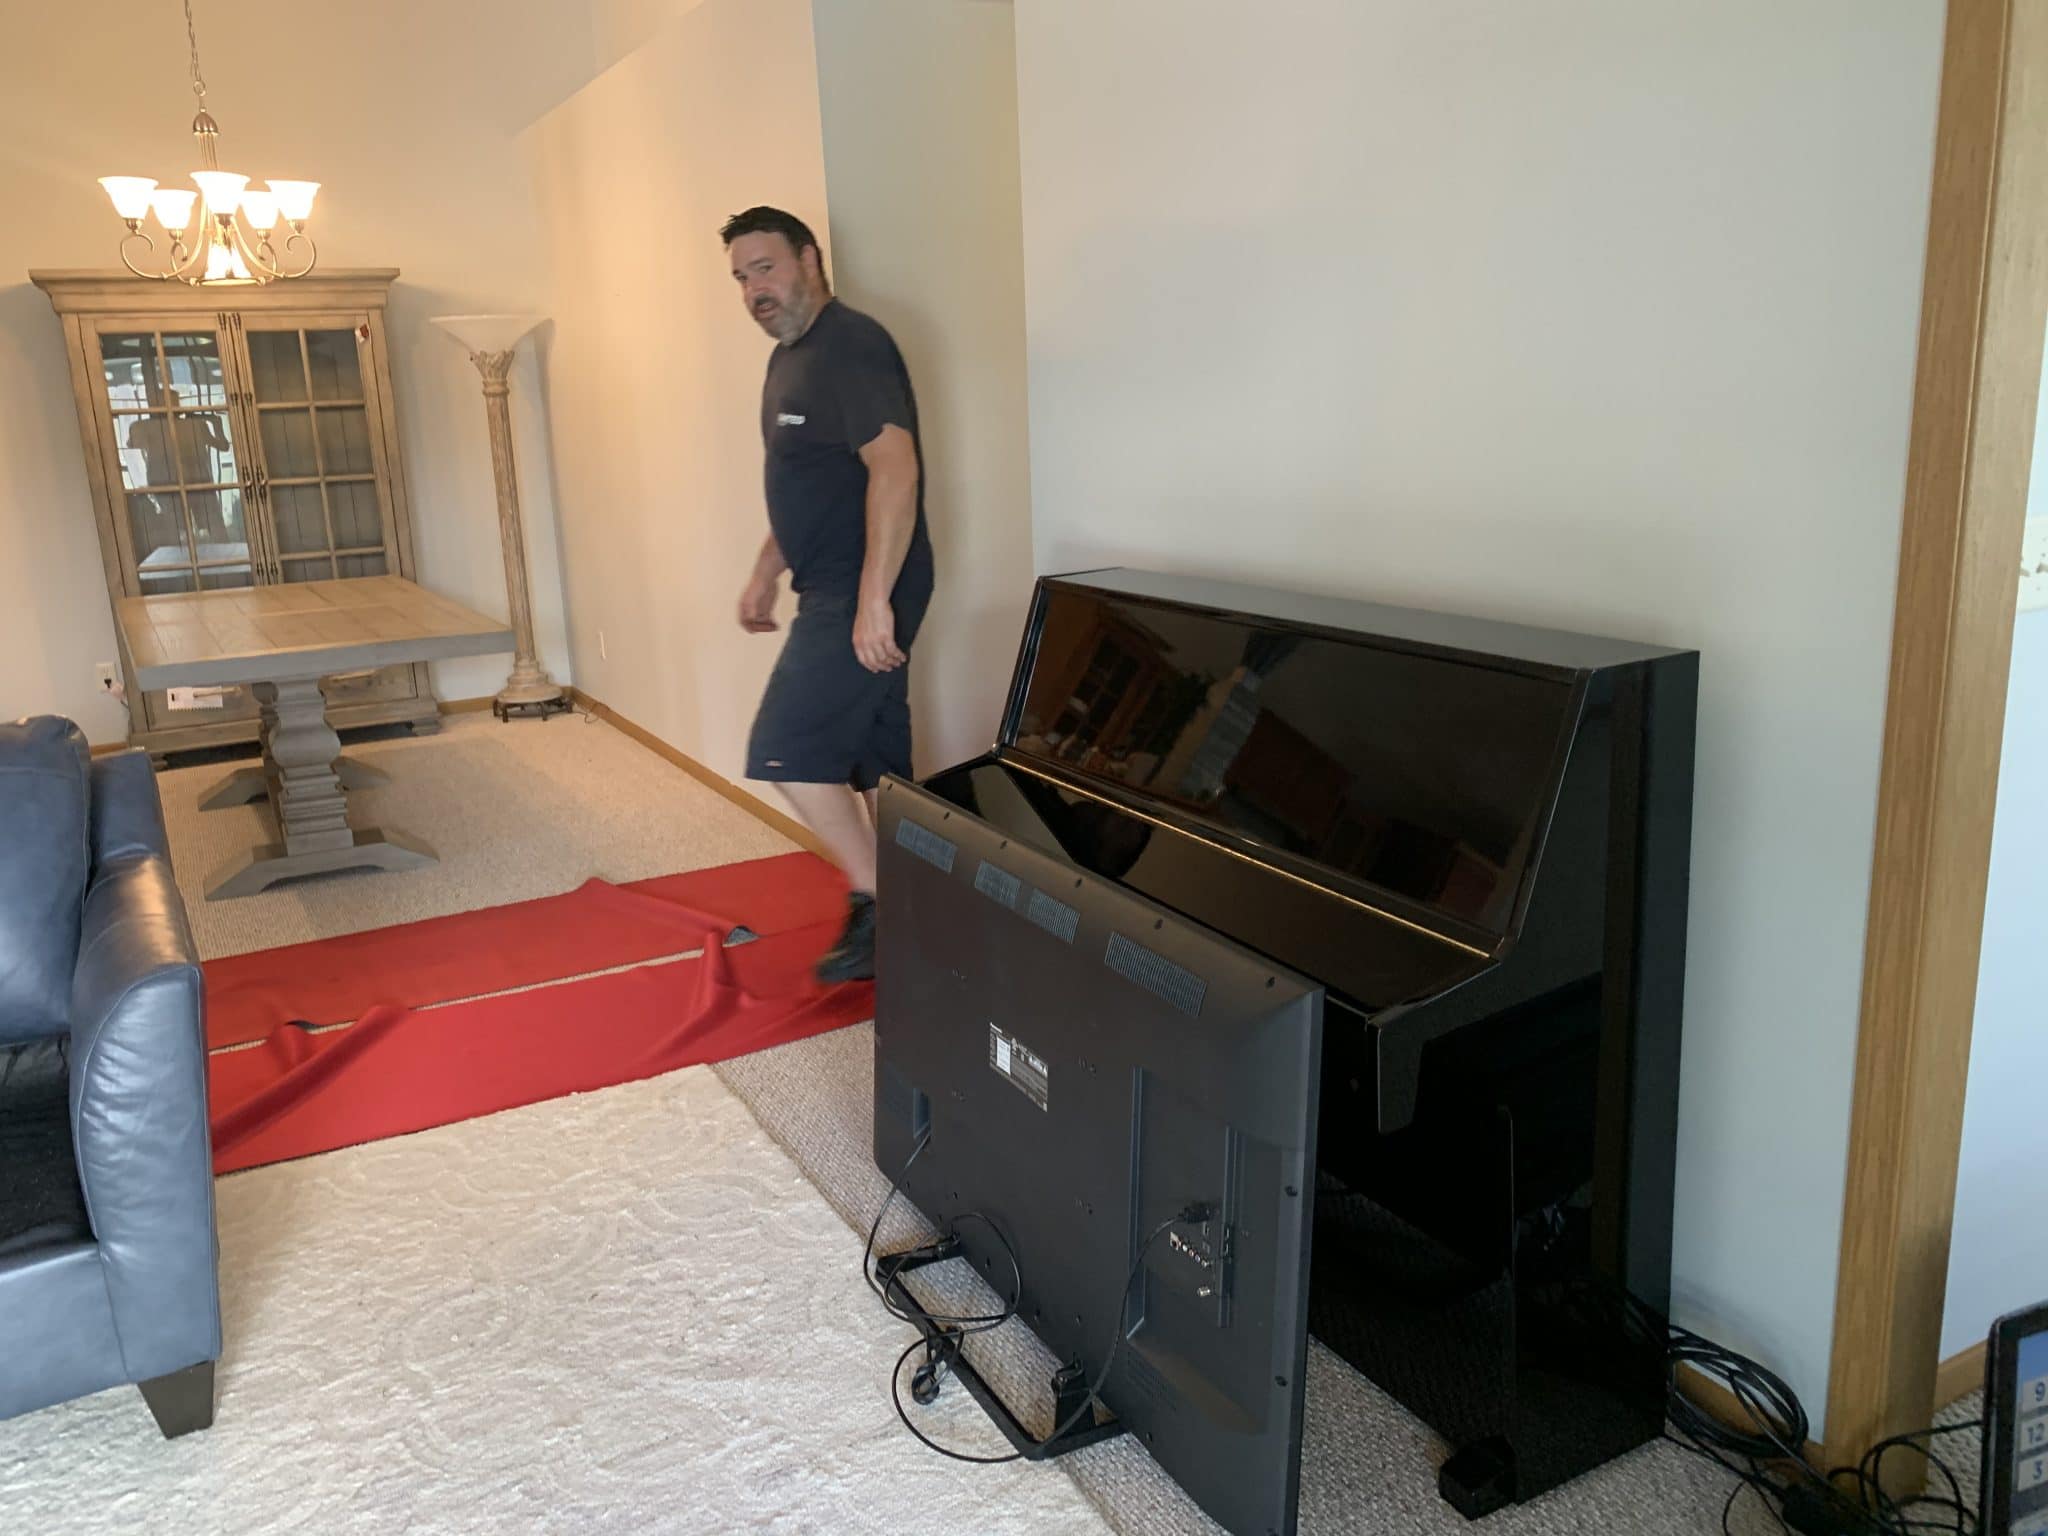 furniture movers in kenosha, movers of furniture in kenosha, kenosha furniture movers